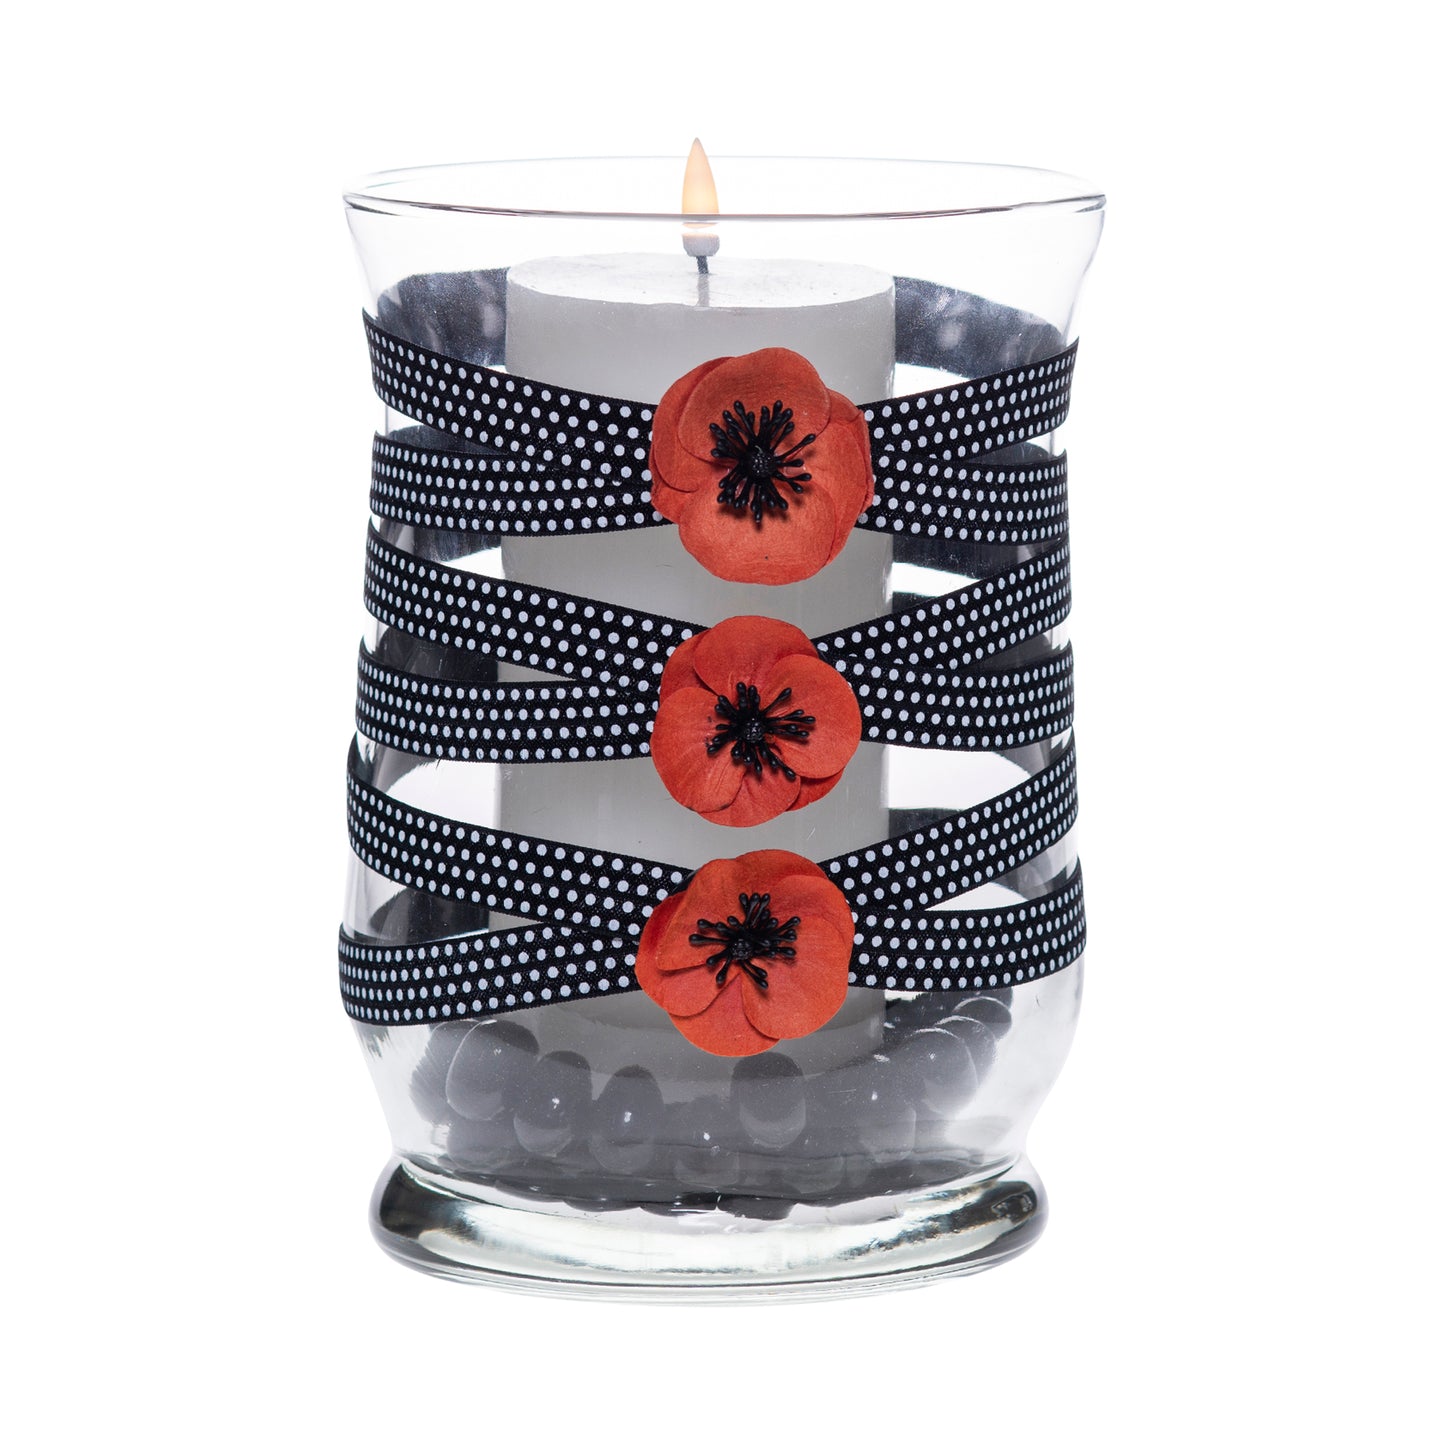 5.5" x 8" Hurricane Black White Polka Dot 5X 6 Rust Red Poppies Halloween-ish Fall-O-Ween Collection Complete Set